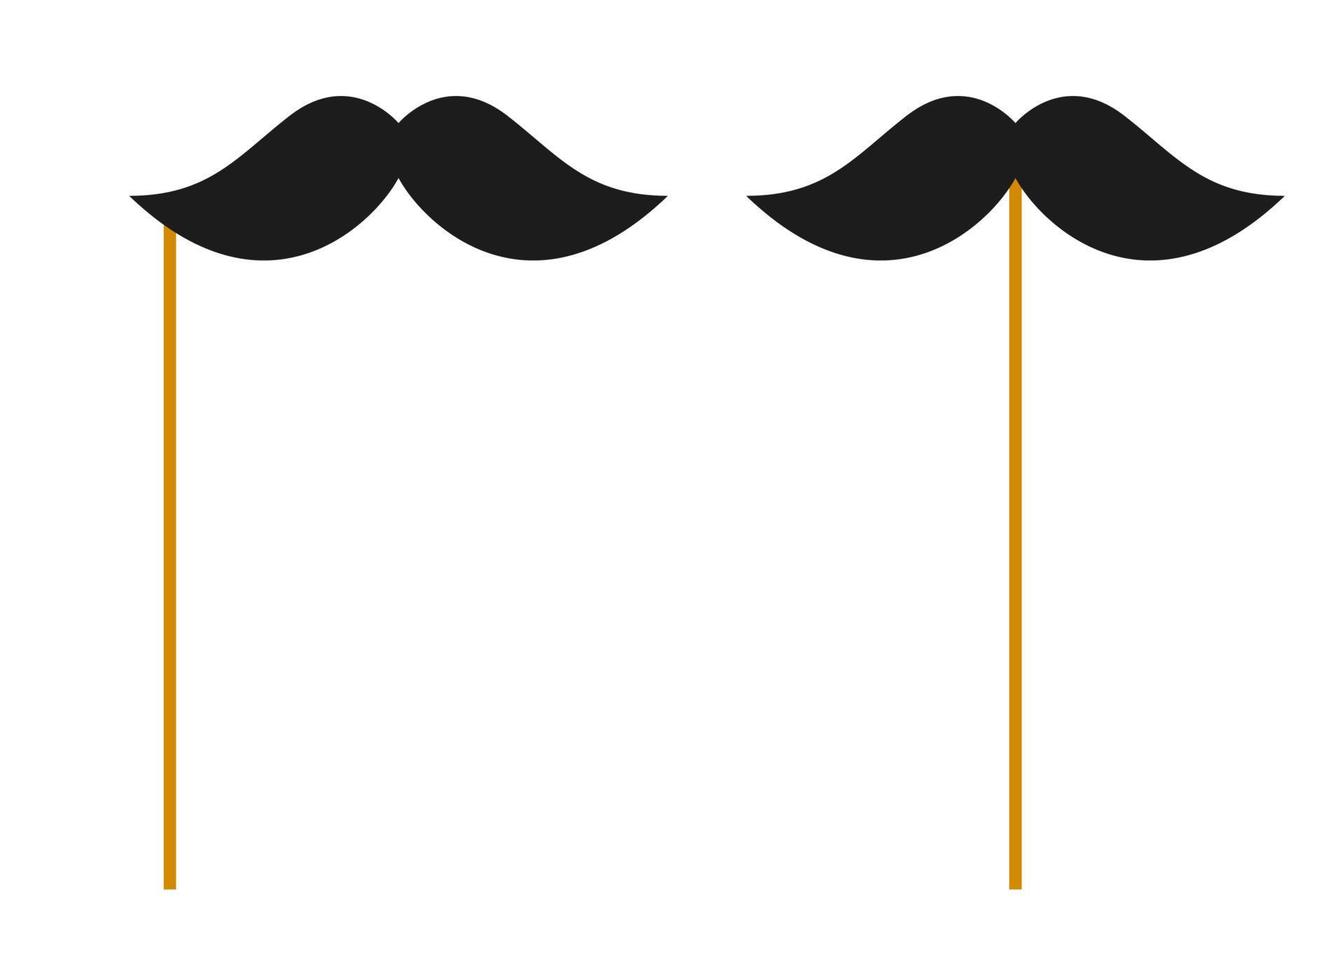 Mustache with wooden stick on white background vector